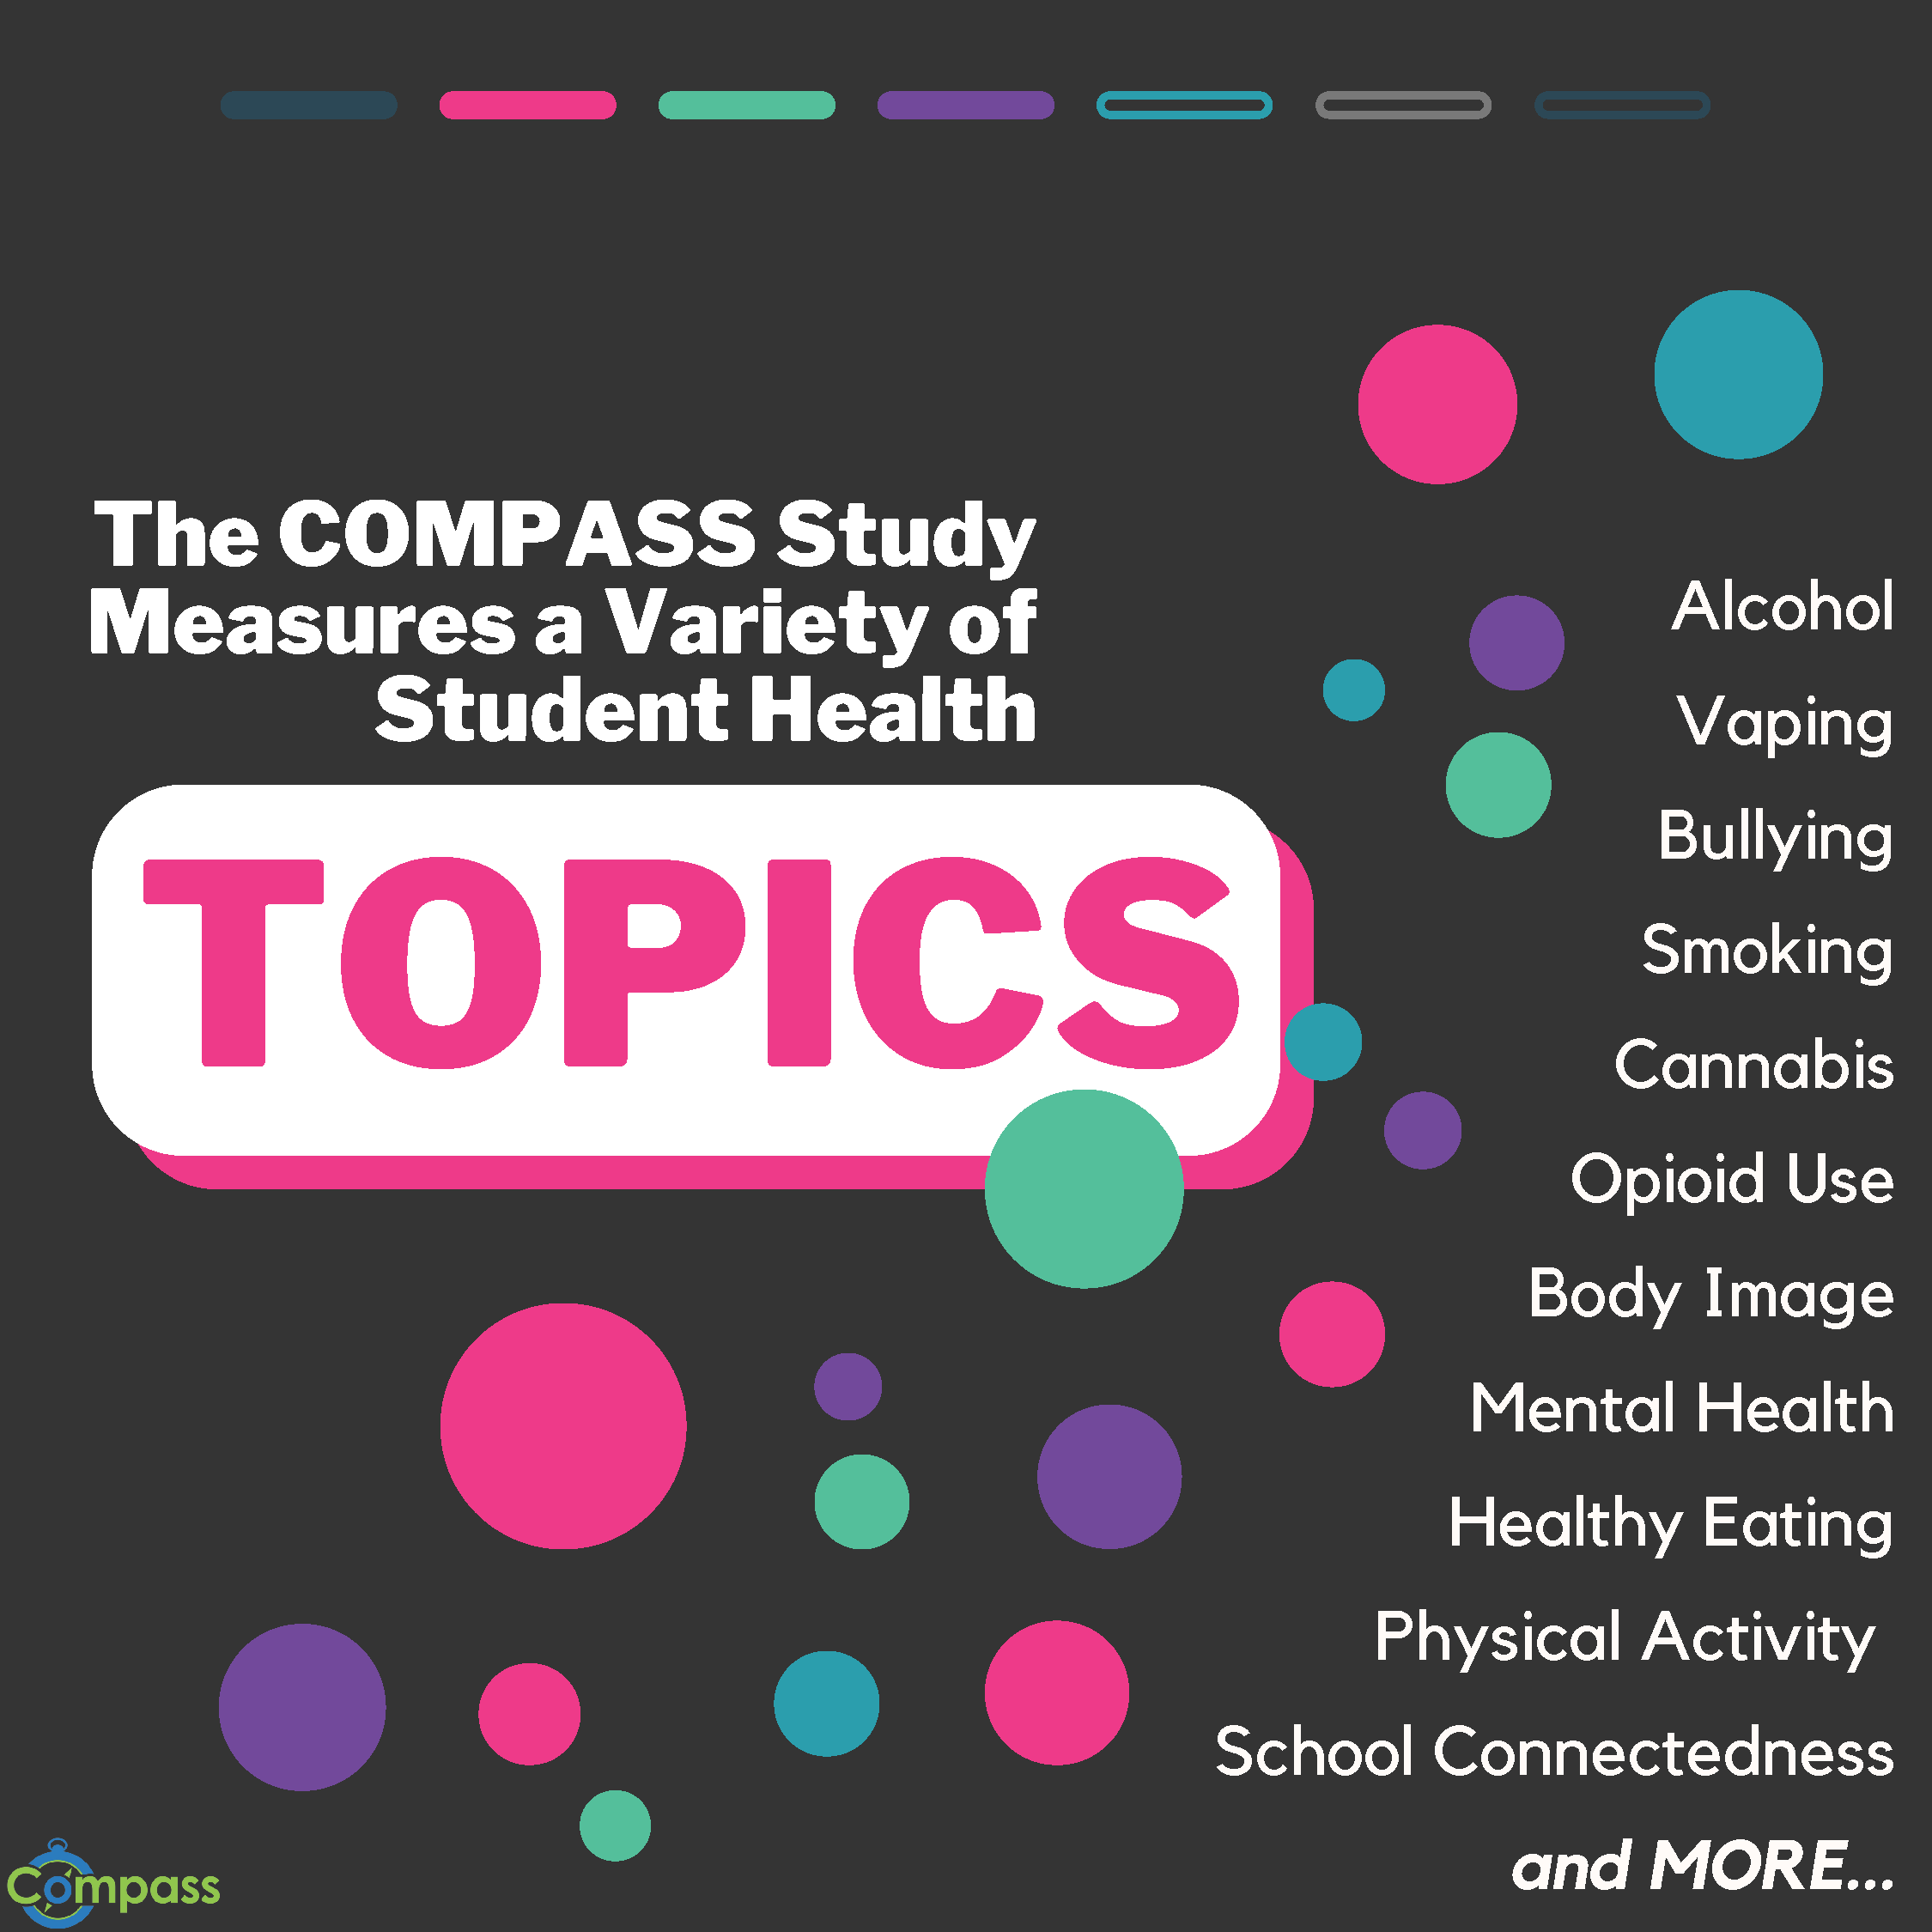 Figure 4- what health topics are measured in COMPASS